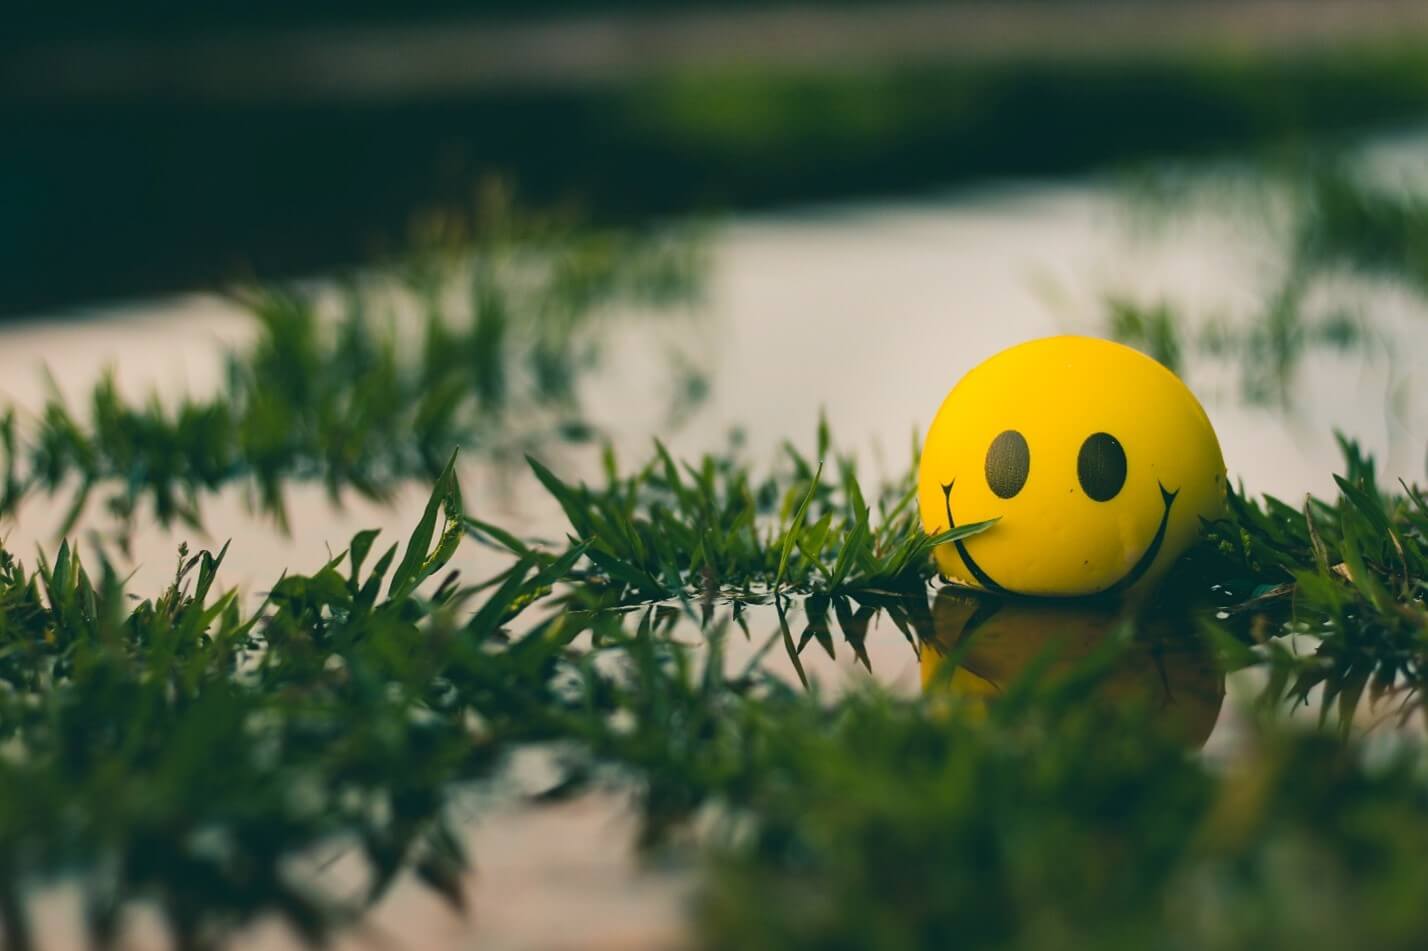 A yellow "smiley face" ball floats in water and is surrounded by greenery.